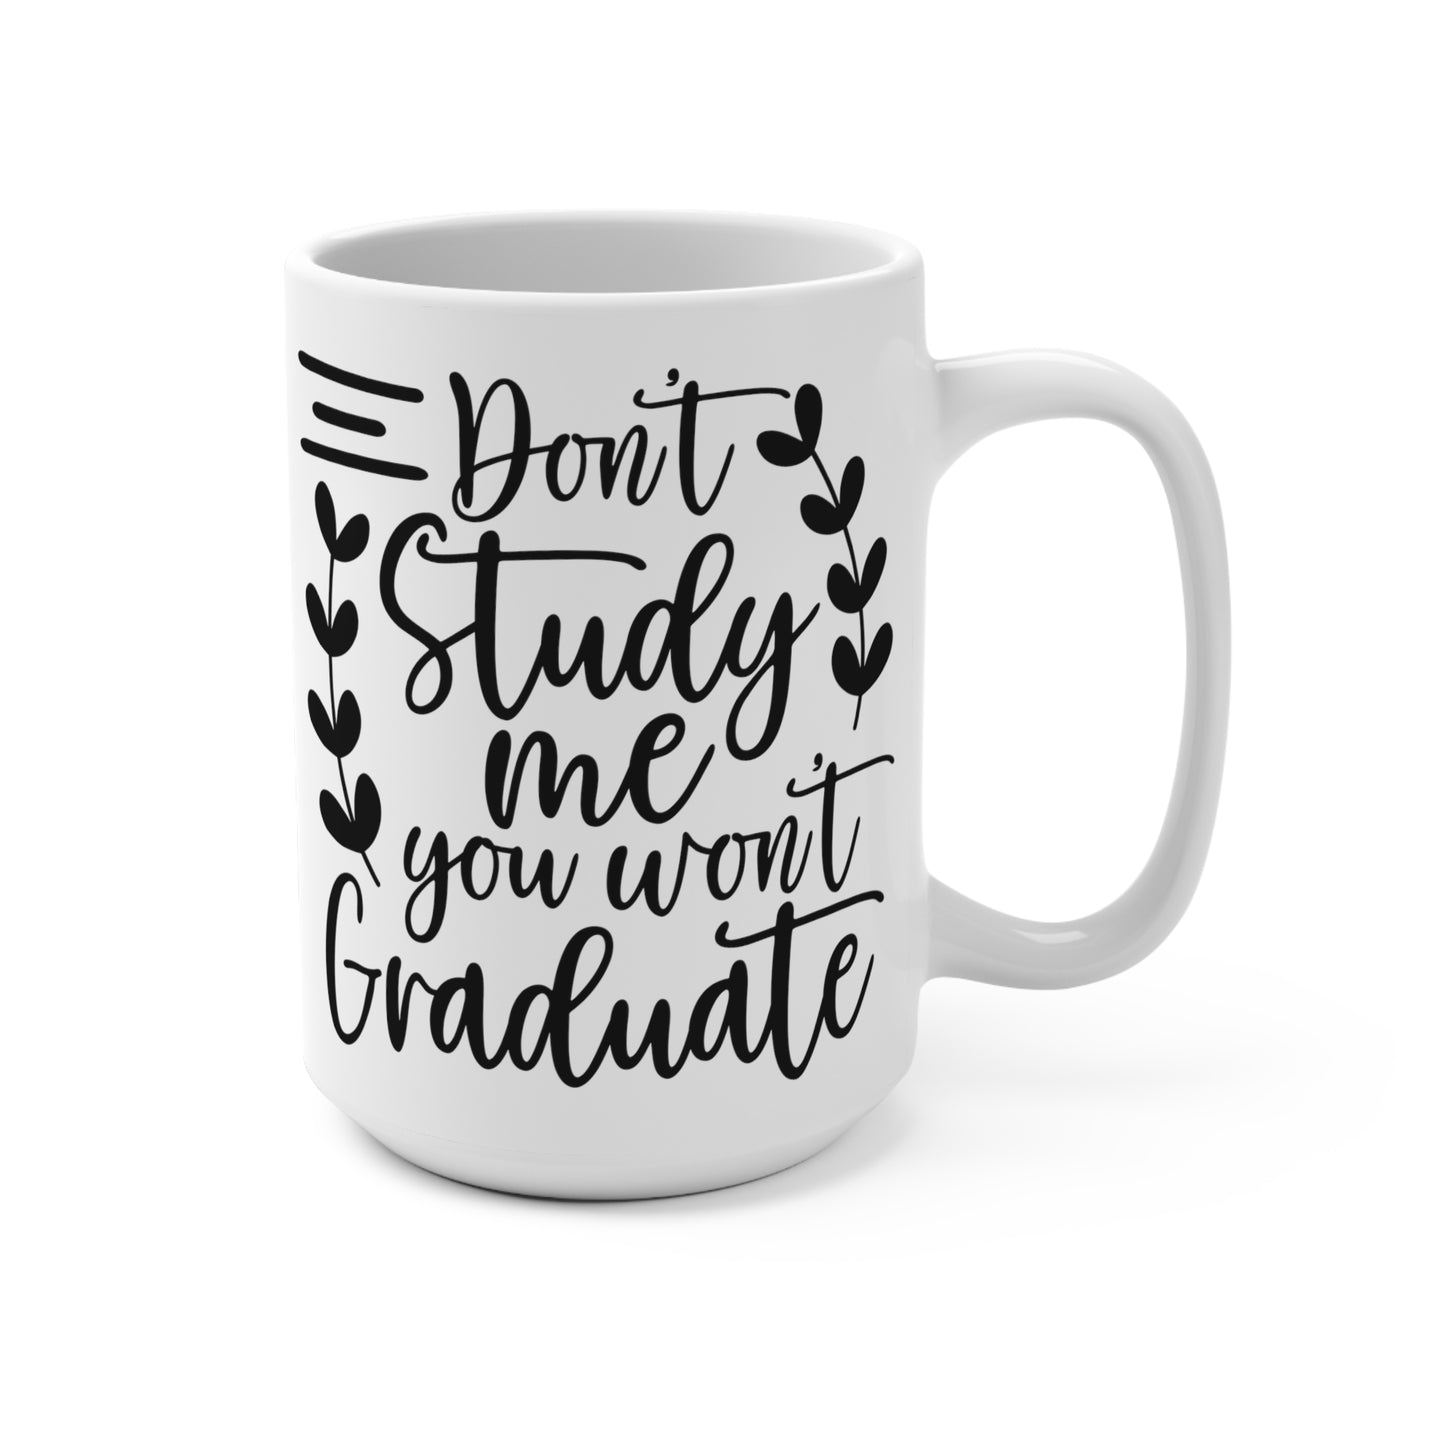 Inspirational Quote Coffee Mug, Don't Study Me You Won't Graduate, Humorous Office Mug, Gift for College Students, Black and White